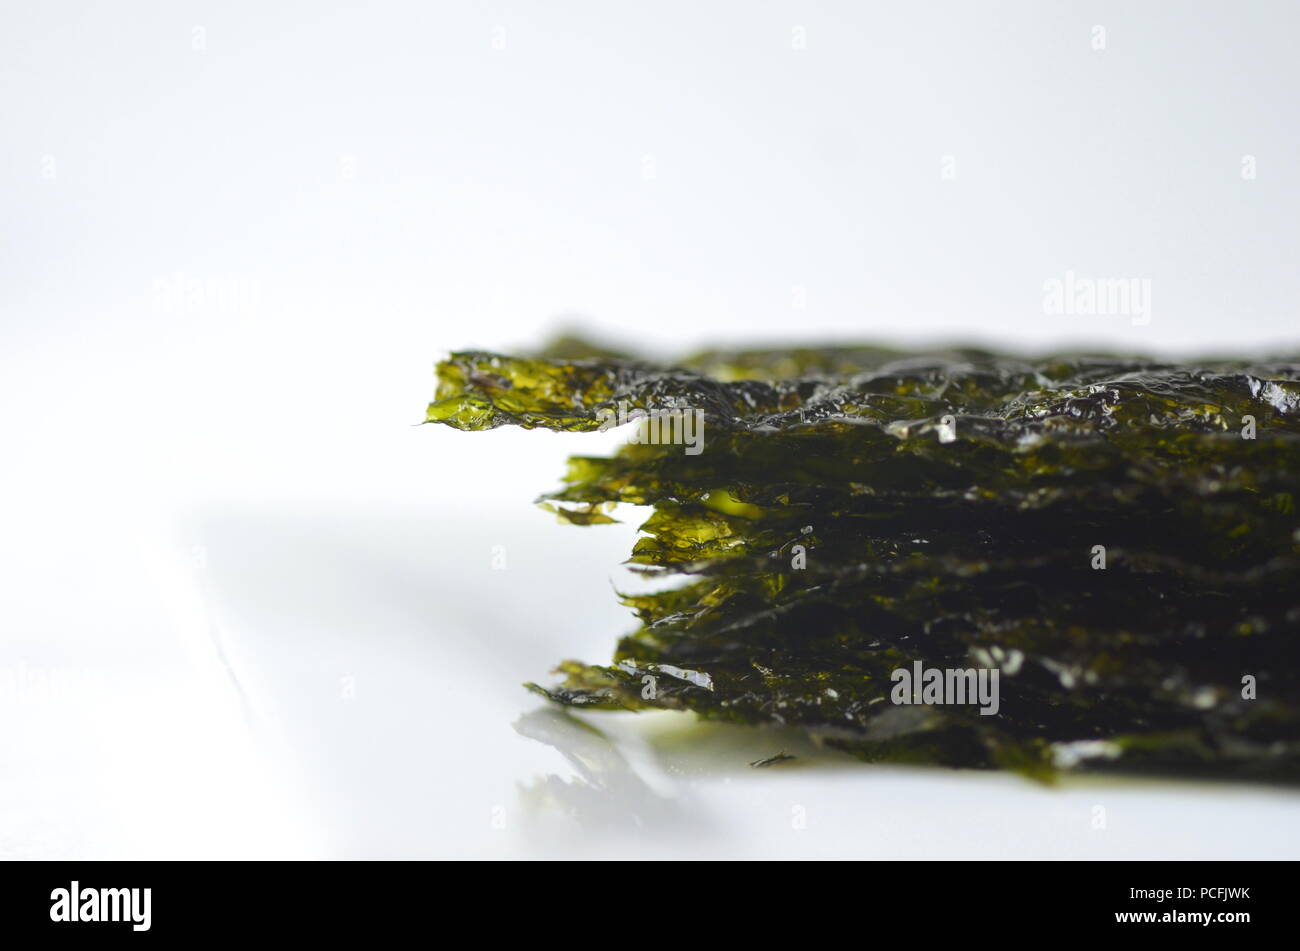 Detail top view of dried seaweed: nori. Isolated on white.Nutrient rich vegan, raw and healthy sea vegetables. Stock Photo